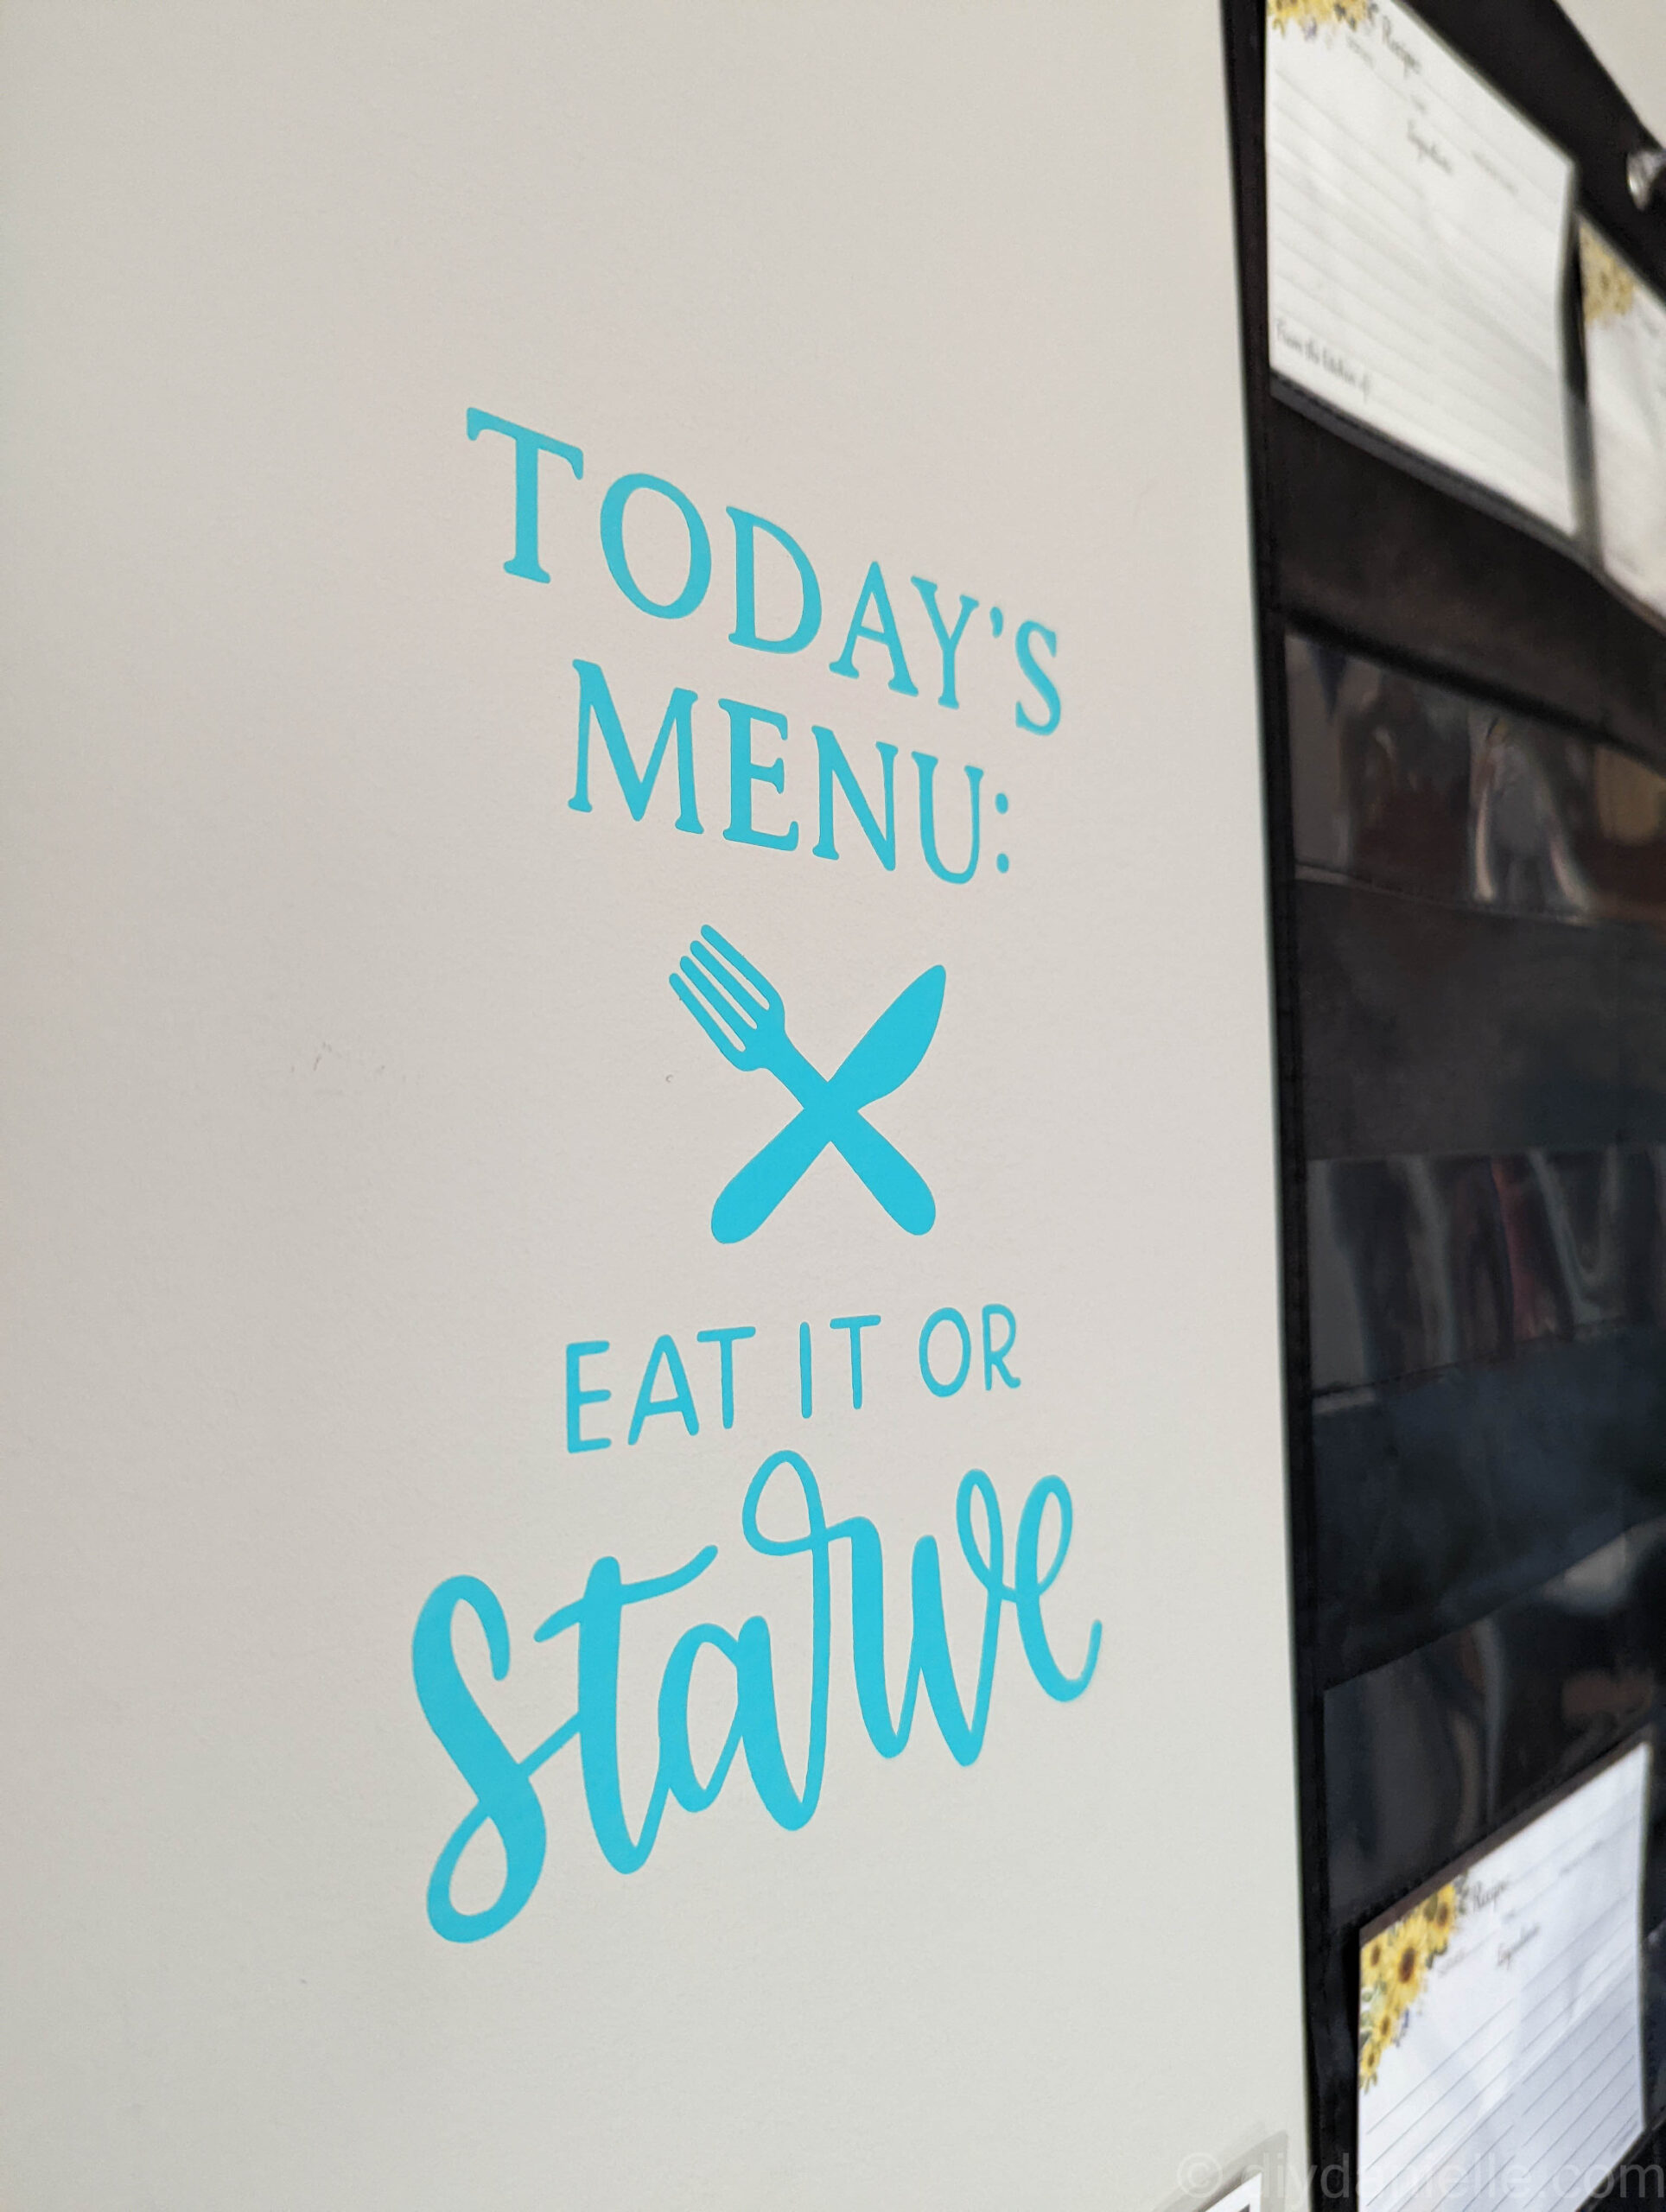 Wall decal next to my menu planner: "Today's Menu: Eat it or STARVE" with a fork and knife crossing each other. 